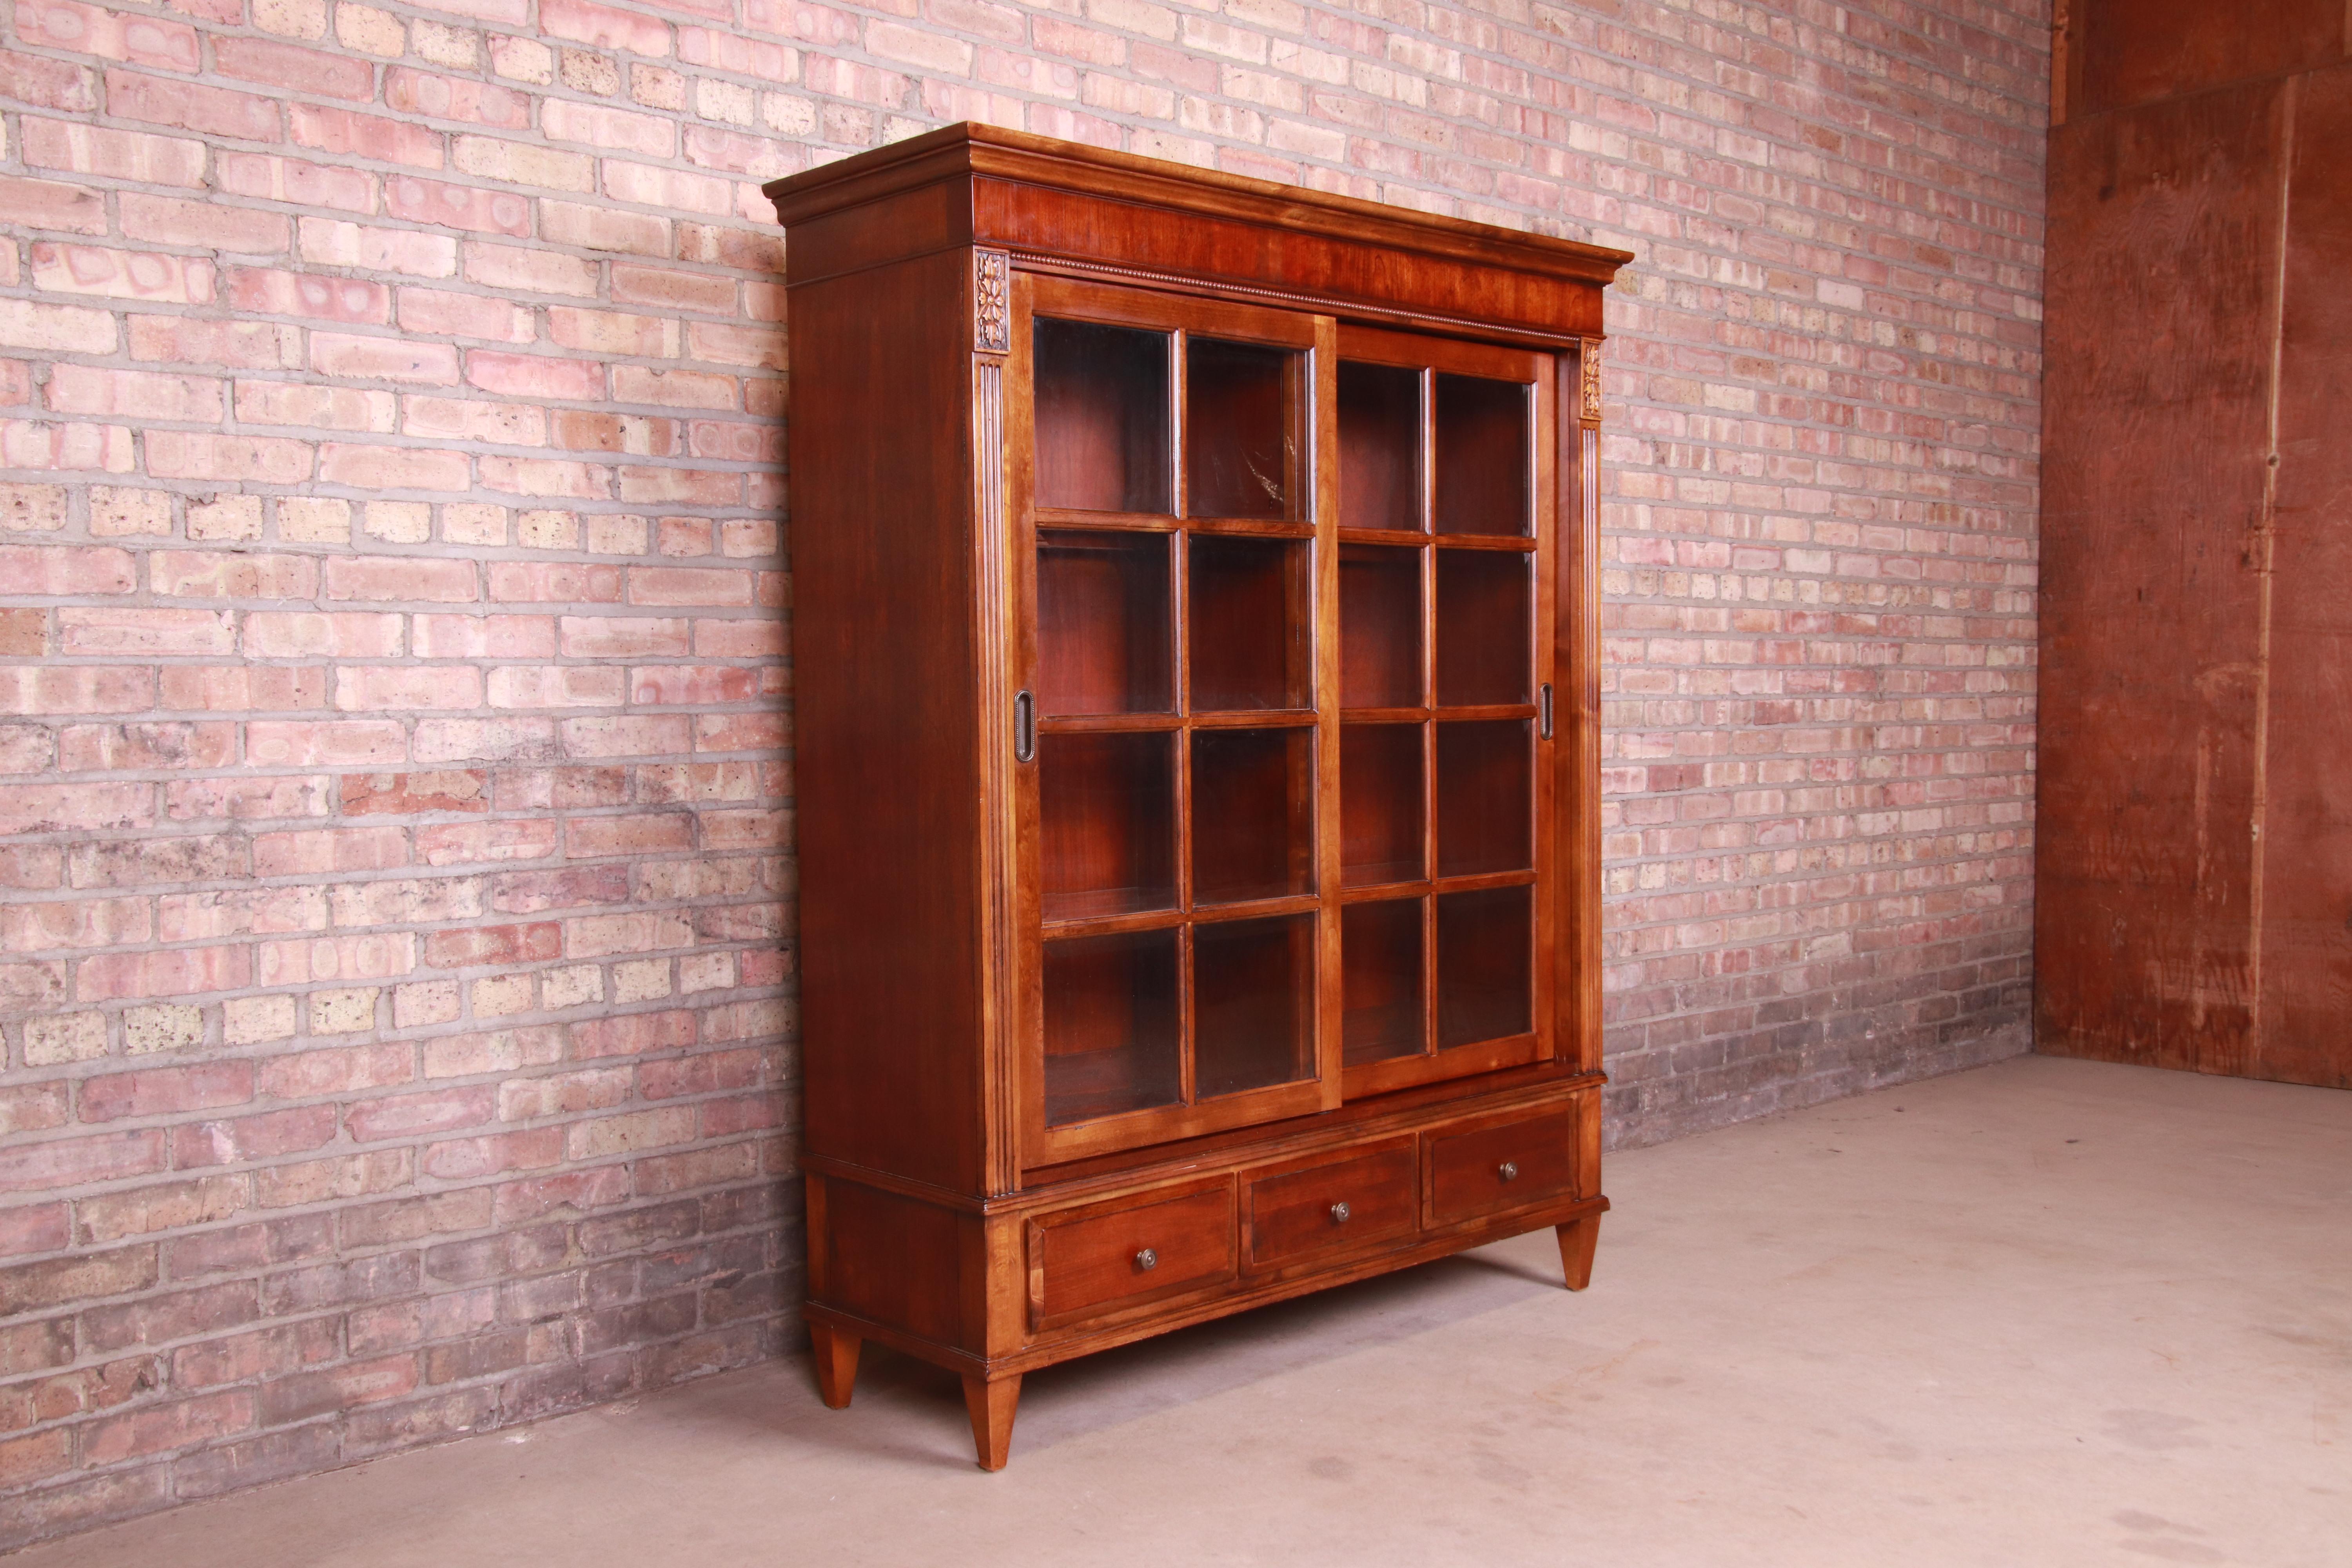 French Provincial Ethan Allen French Regency Cherry Wood Lighted Bookcase or Display Cabinet